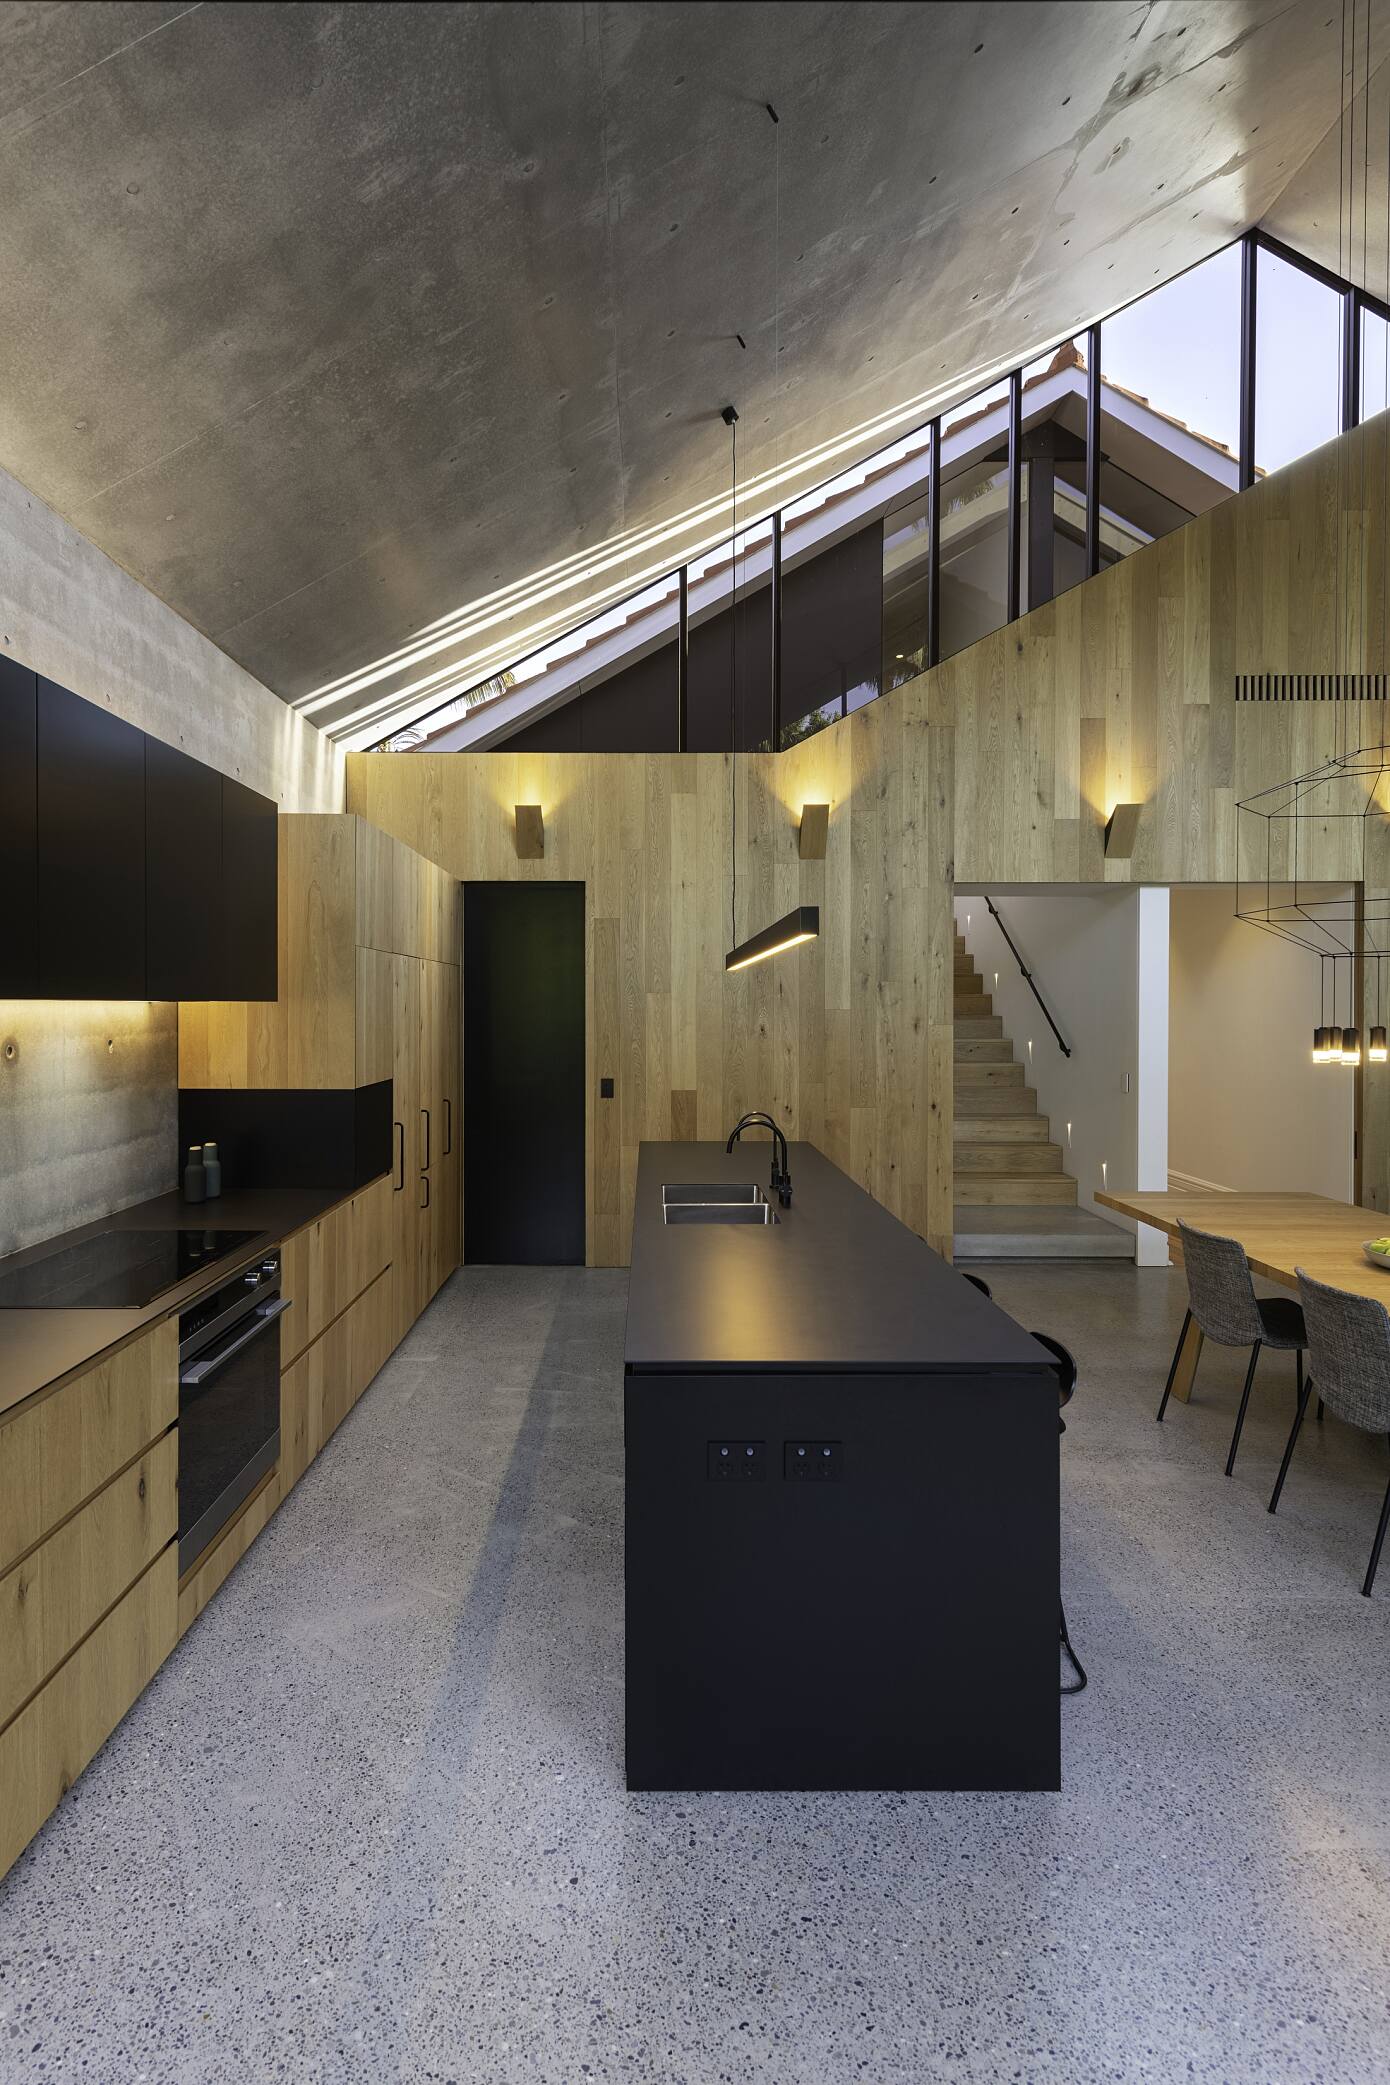 015-extruded-house-mck-architecture-interiors